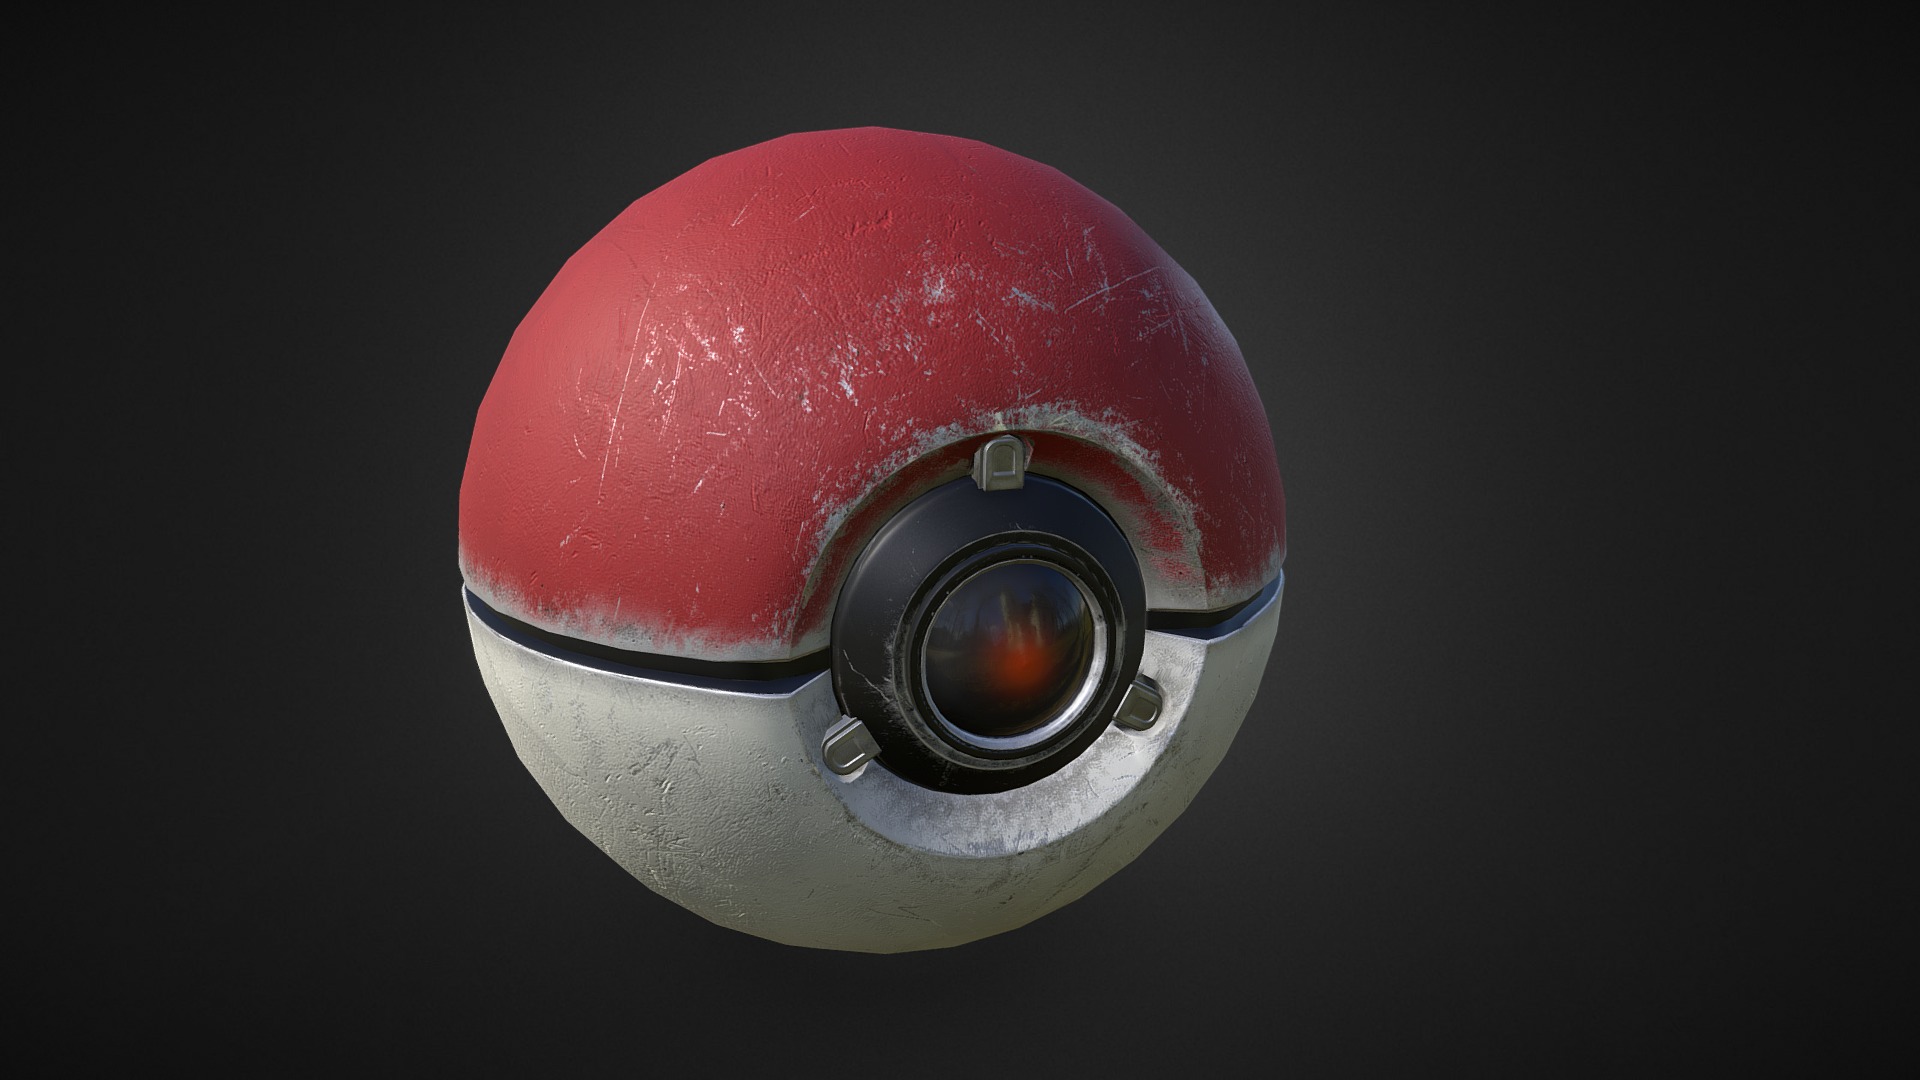 3D model PBR Pokeball - This is a 3D model of the PBR Pokeball. The 3D model is about a red and white circular object.